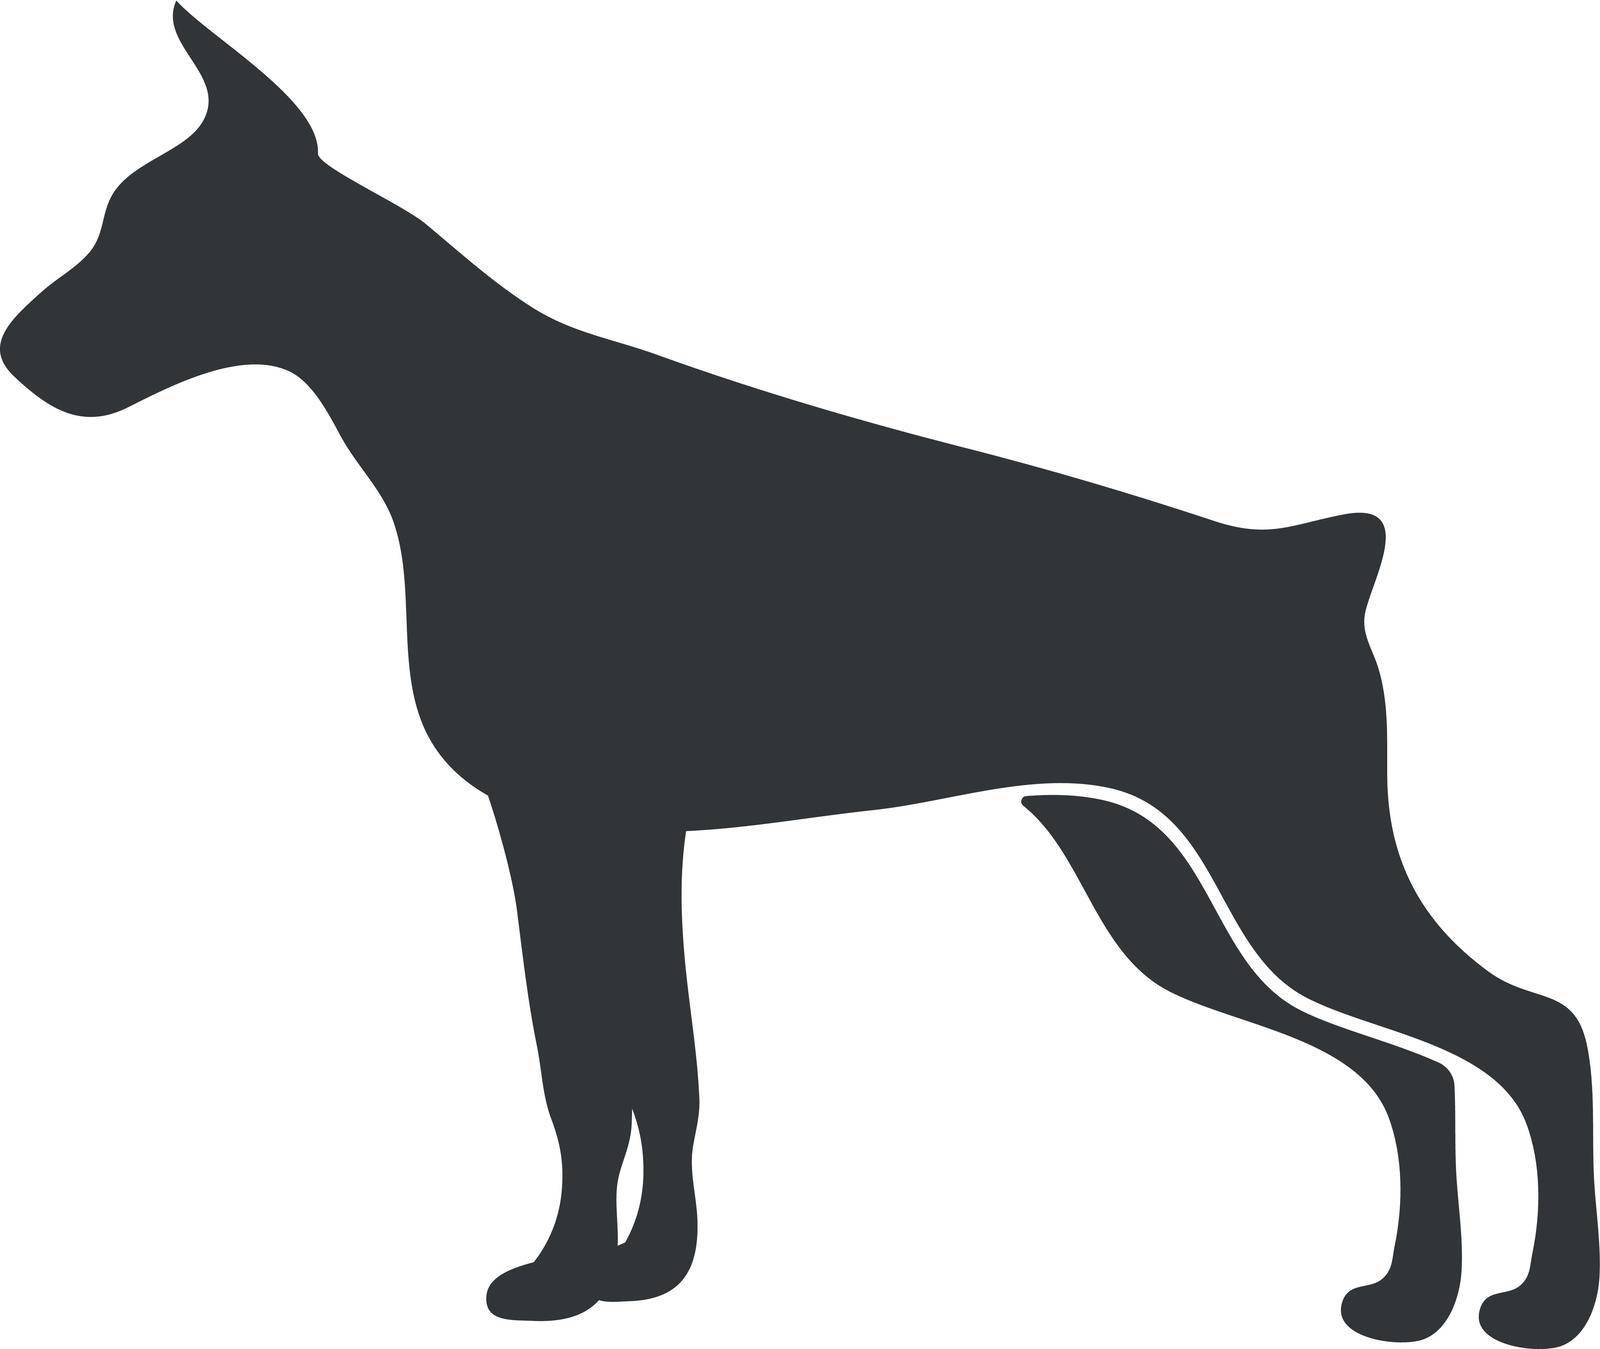 Doberman silhouette. pedigree shorthaired beast running dog, vector icon isolated on white background